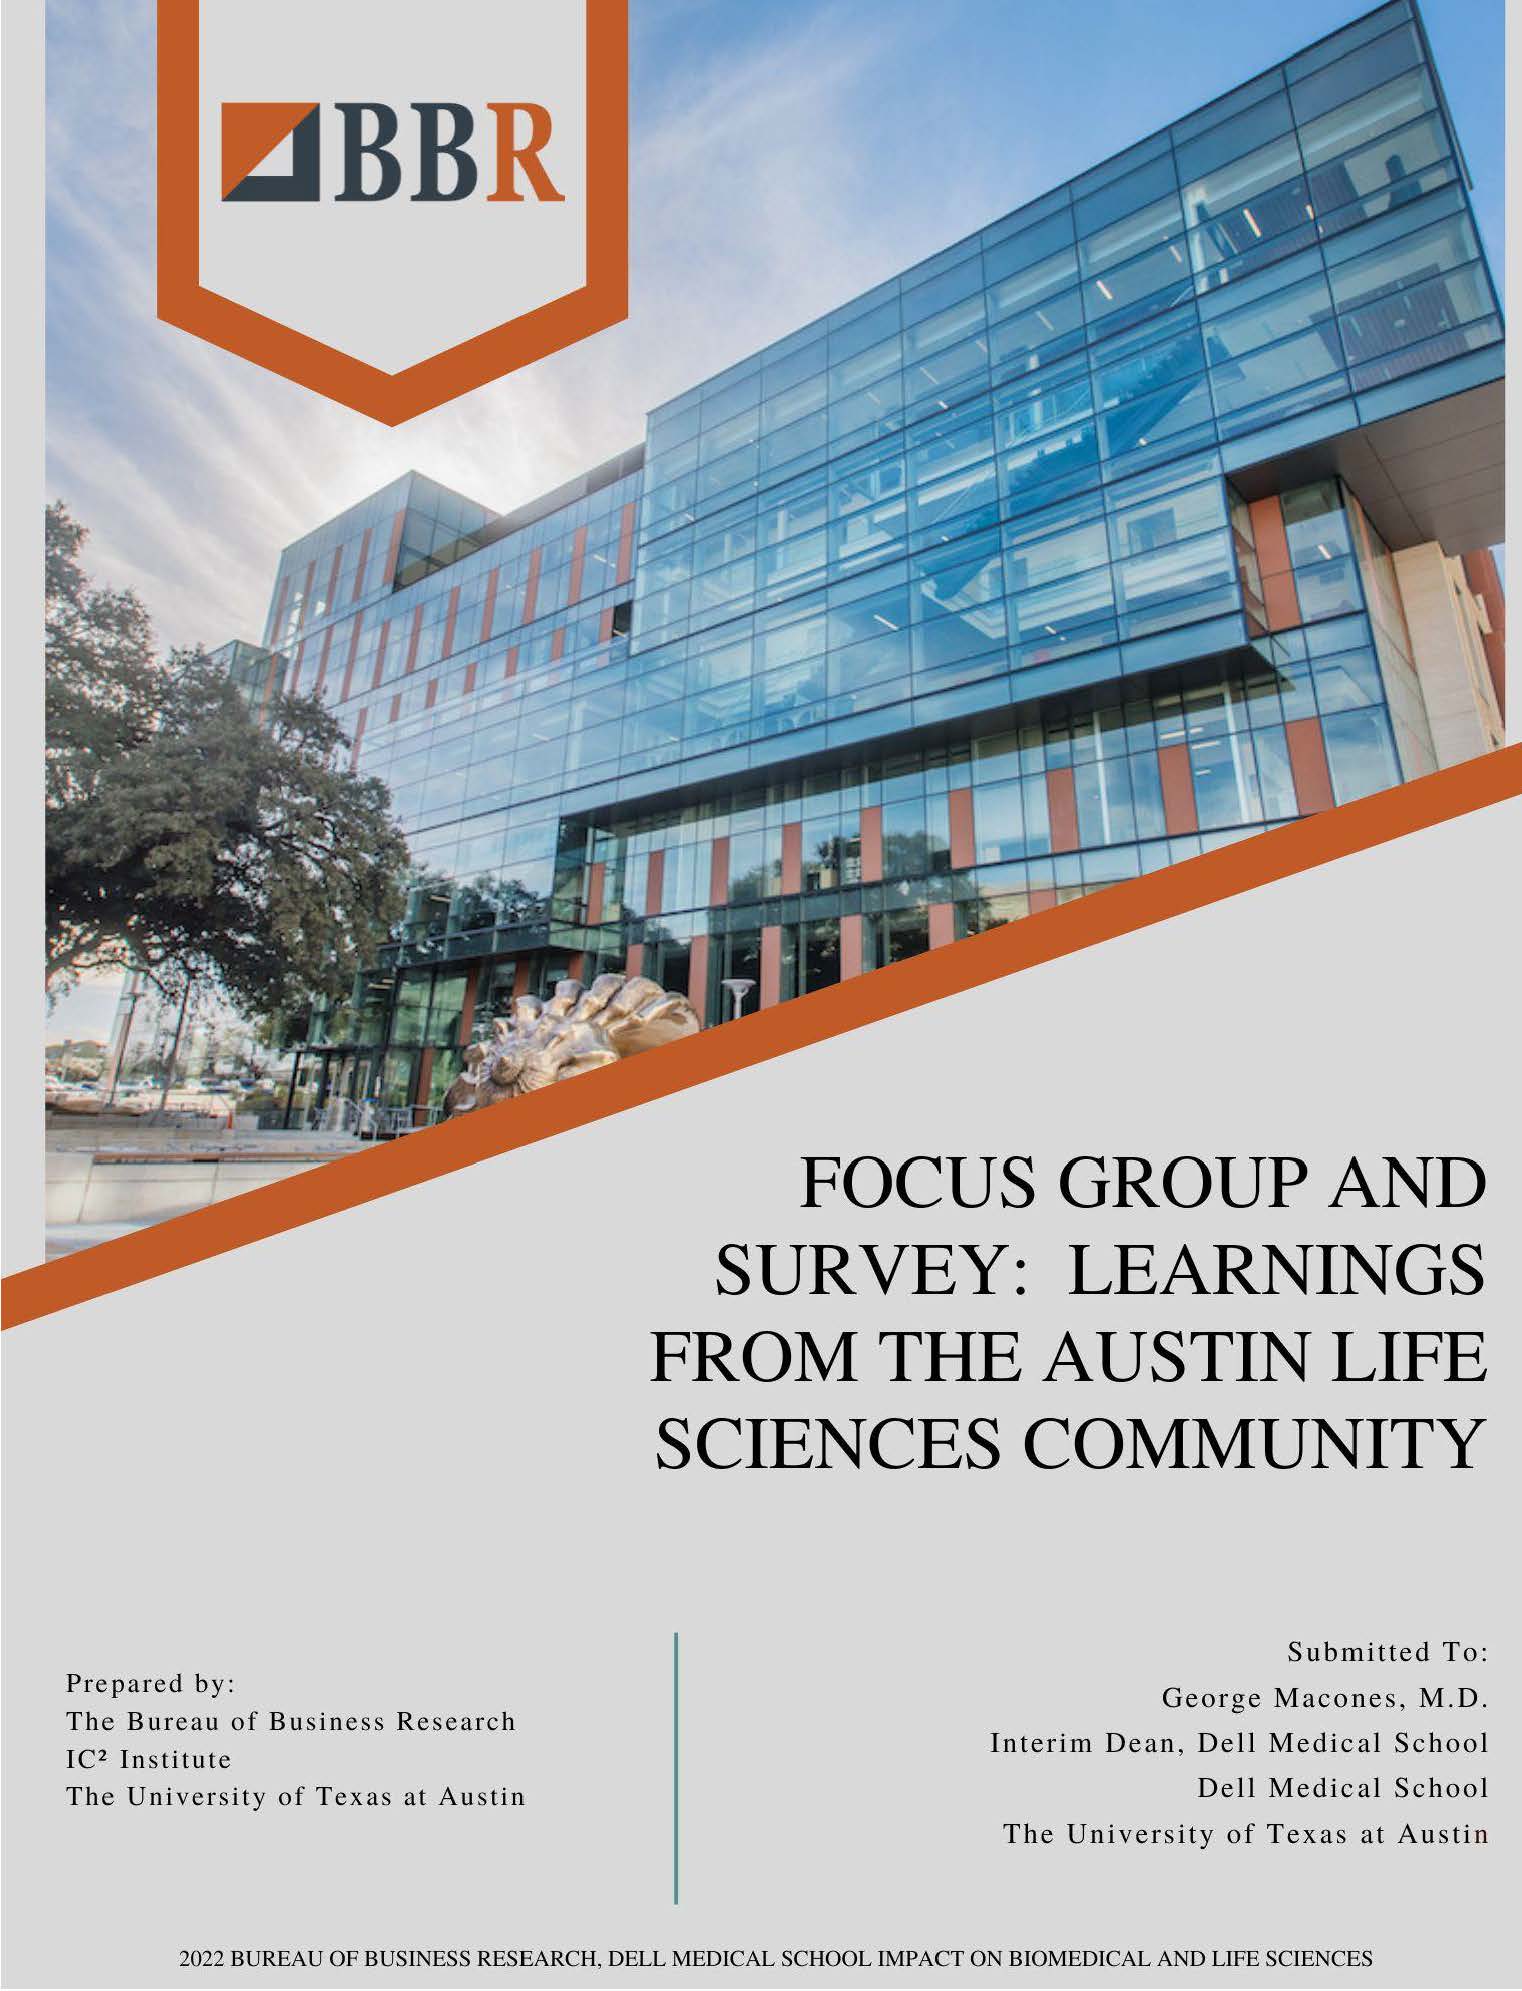 Picture of report cover with building of Dell Medical School